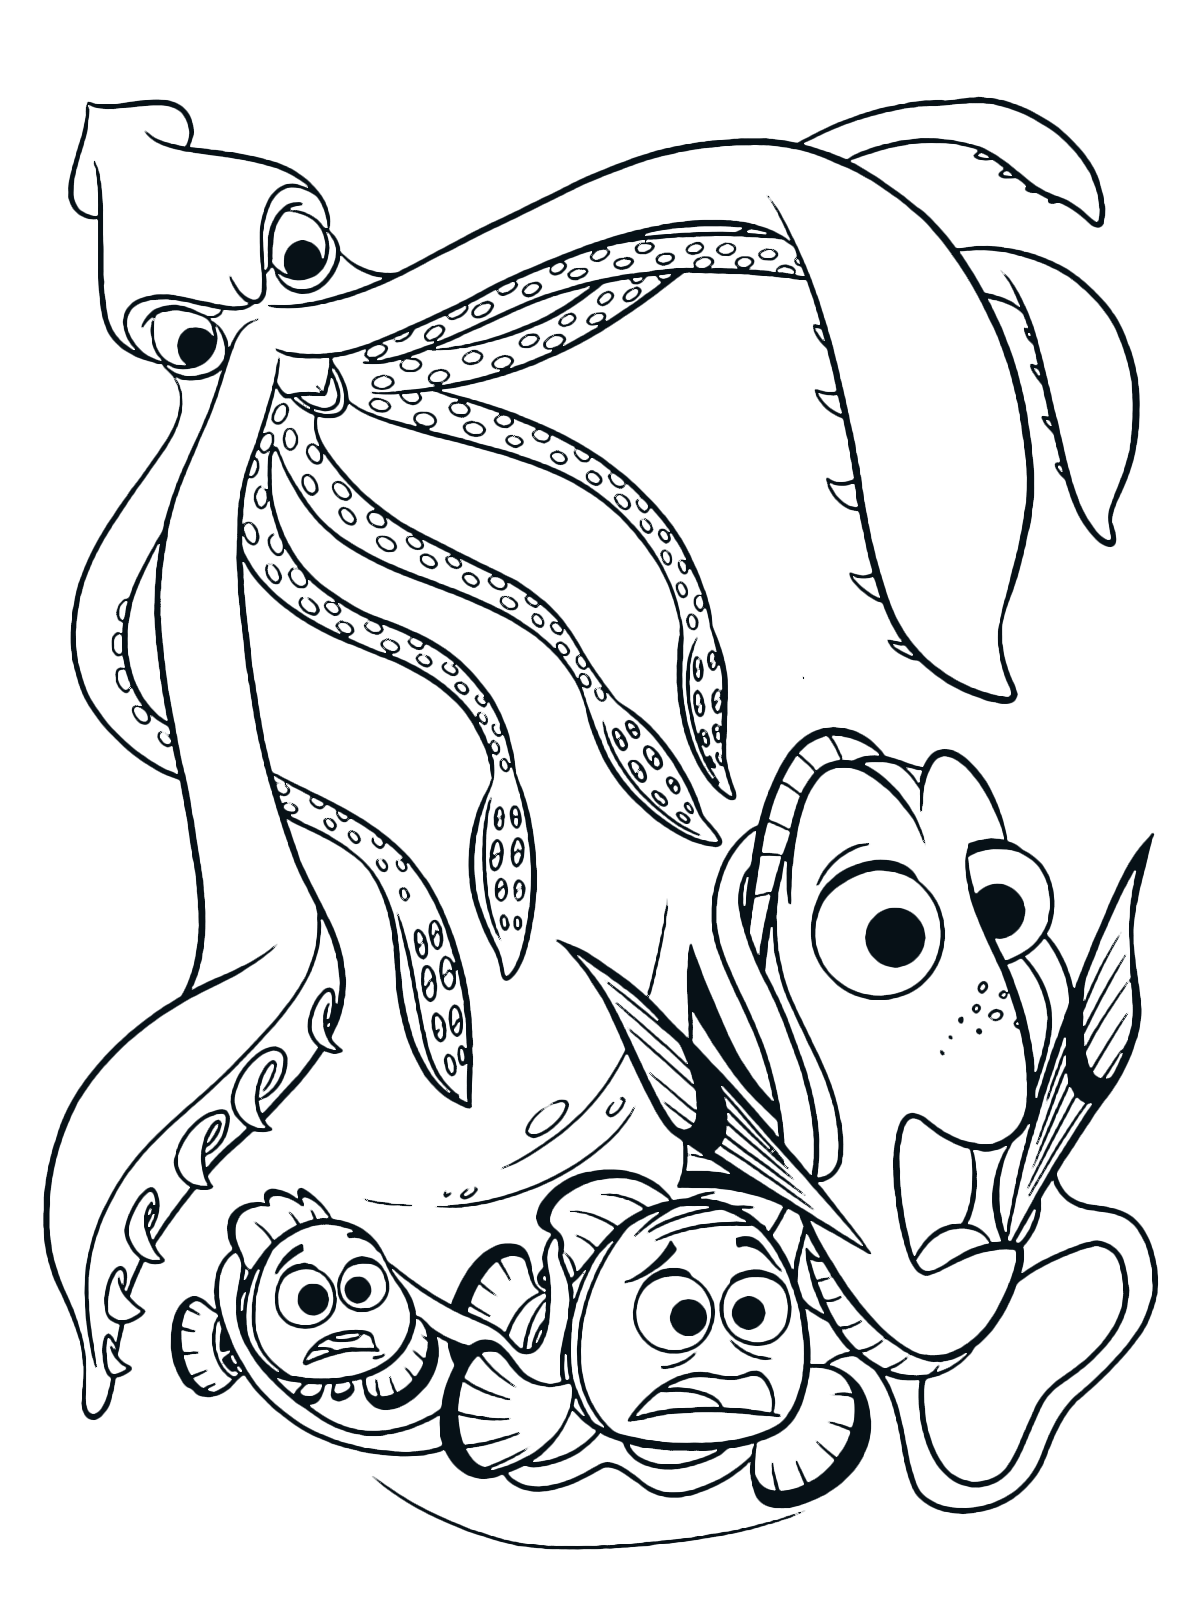 Finding Dory coloring page - Dory Marlin and Nemo are attacked by a giant  squid | Animal coloring pages, Nemo coloring pages, Coloring pictures